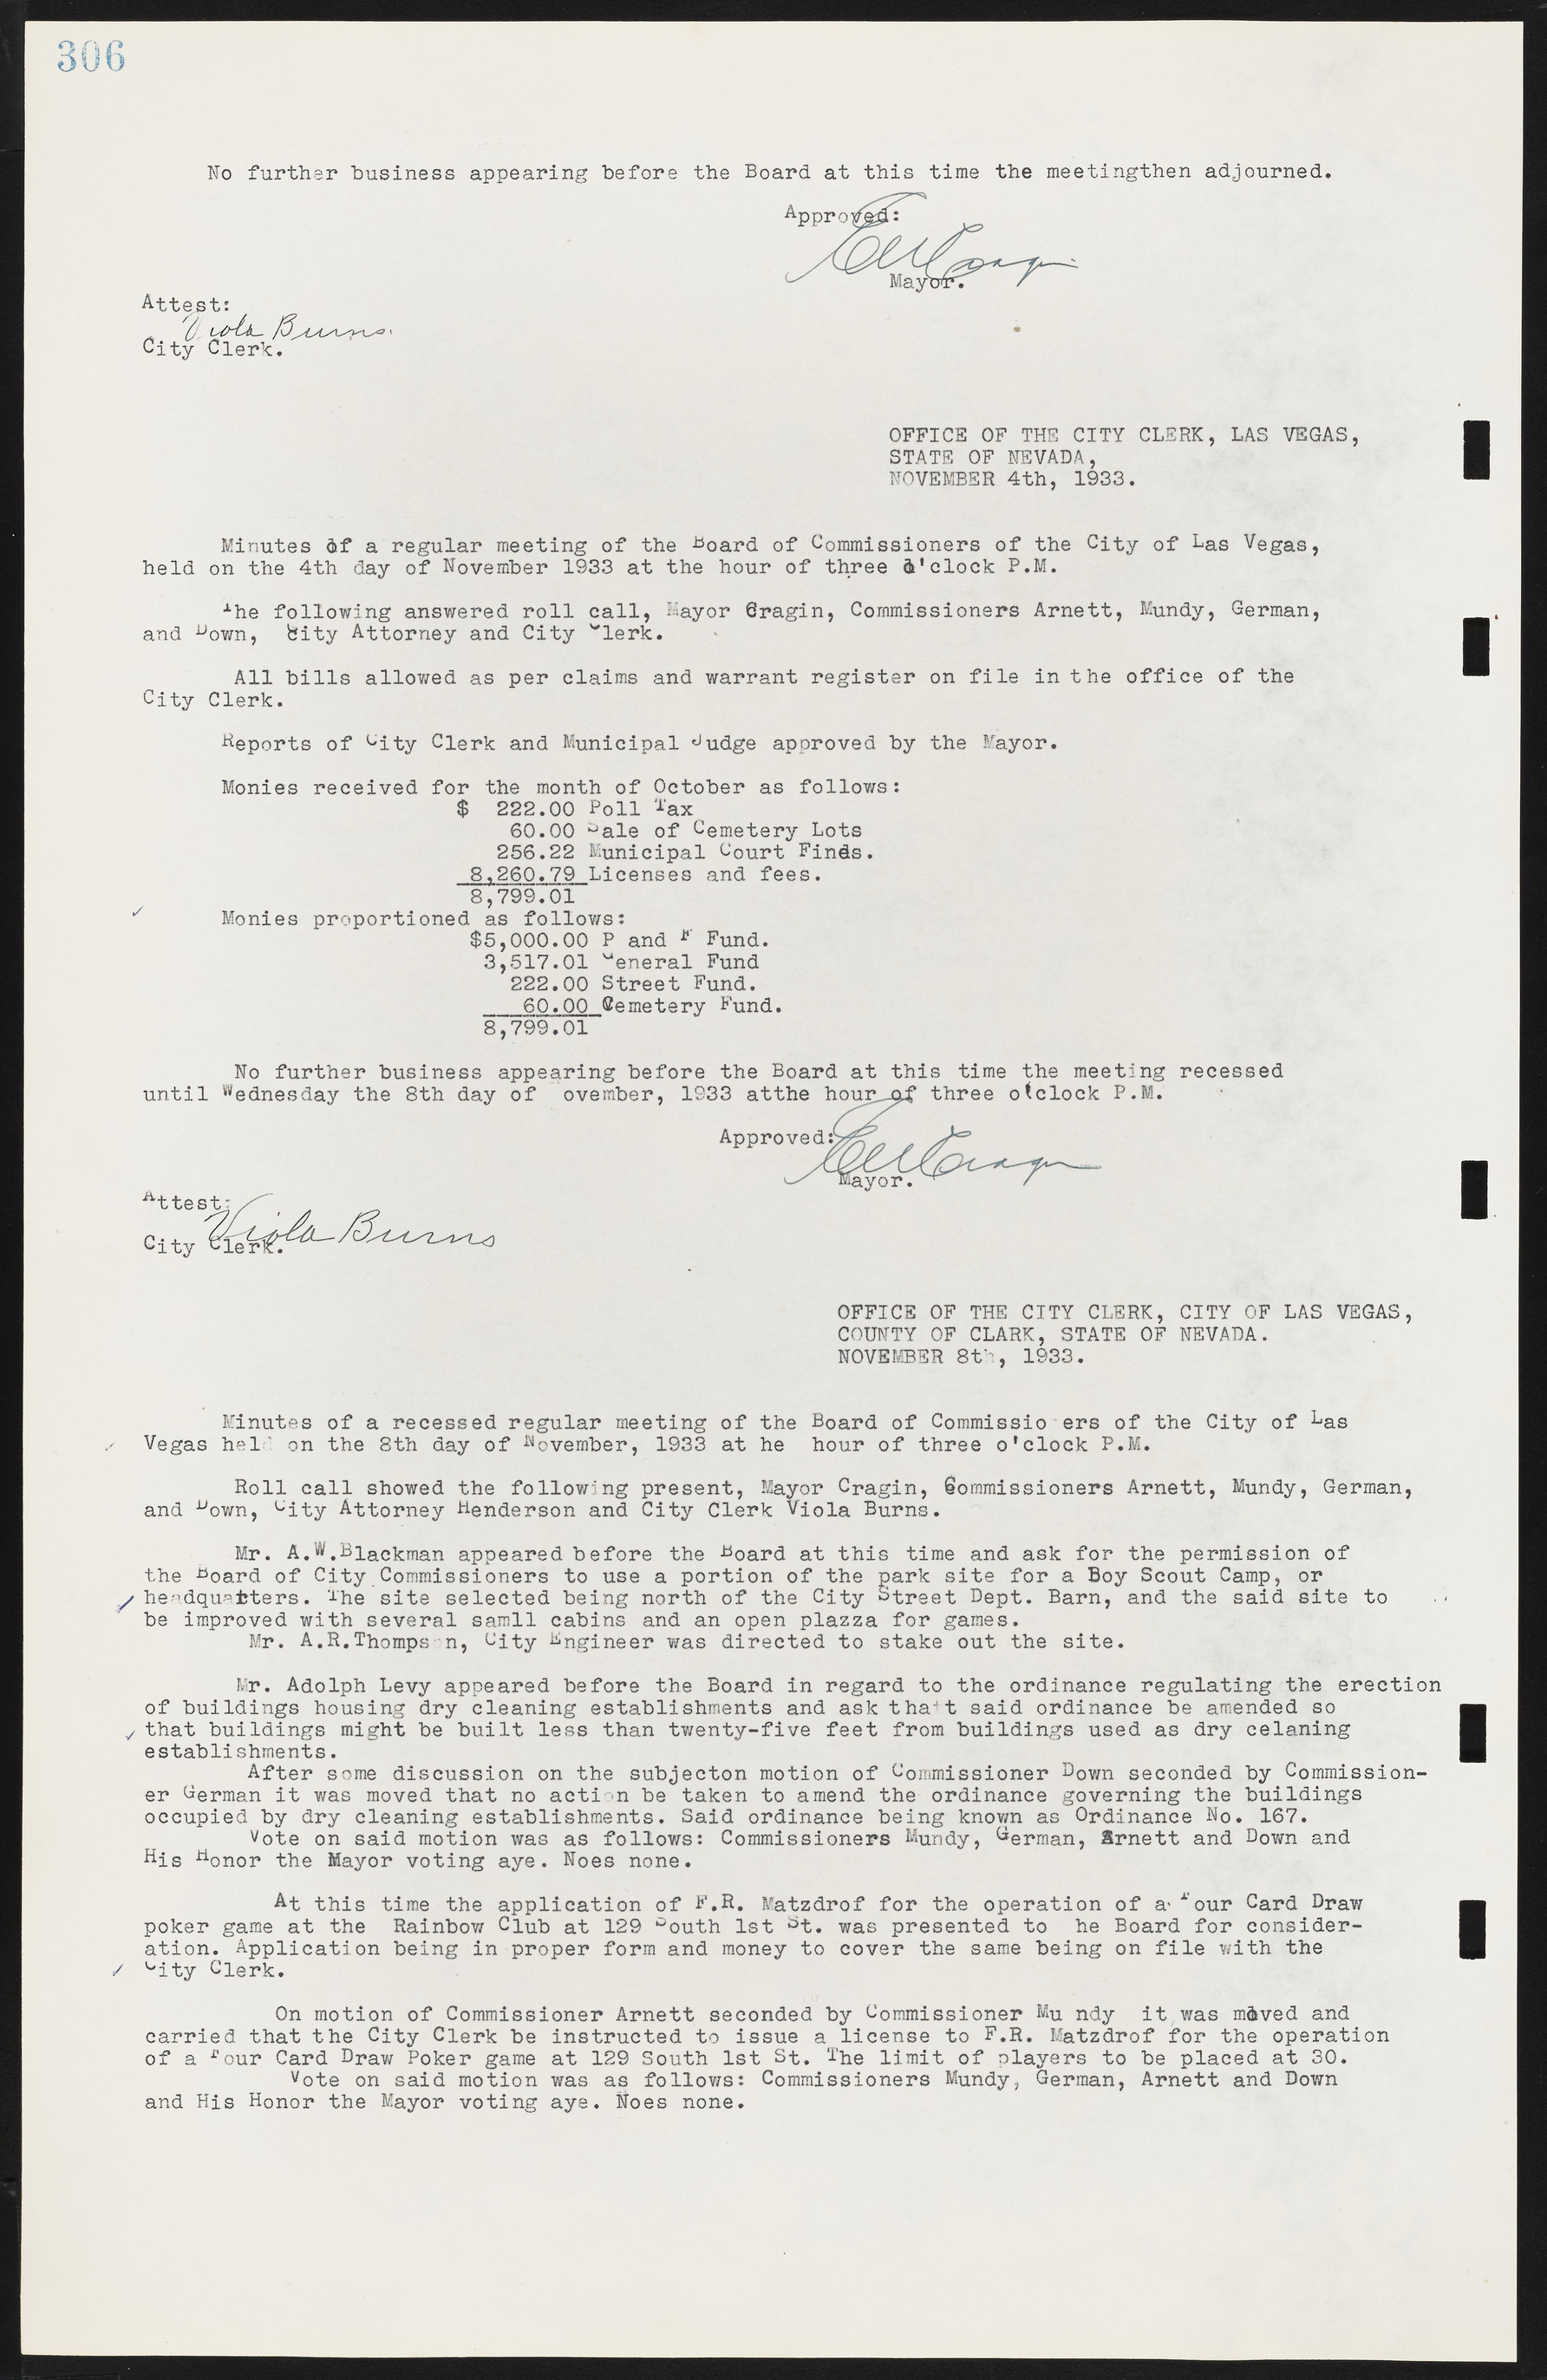 Las Vegas City Commission Minutes, May 14, 1929 to February 11, 1937, lvc000003-313